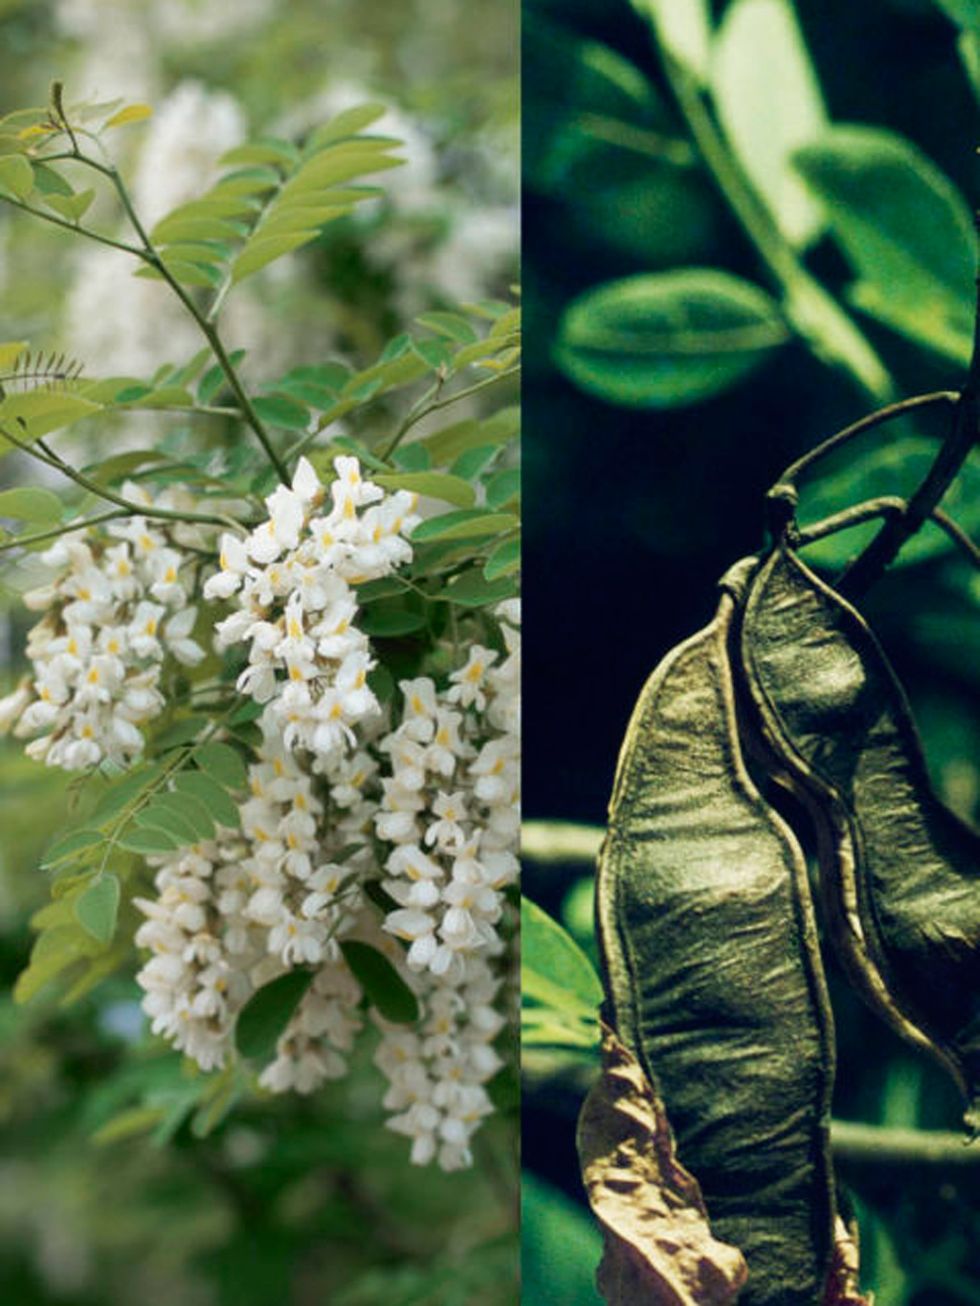 Organism, Leaf, Botany, Flowering plant, Plant stem, buddleia, Insect, Perennial plant, Buckthorn family, Moschatel family, 